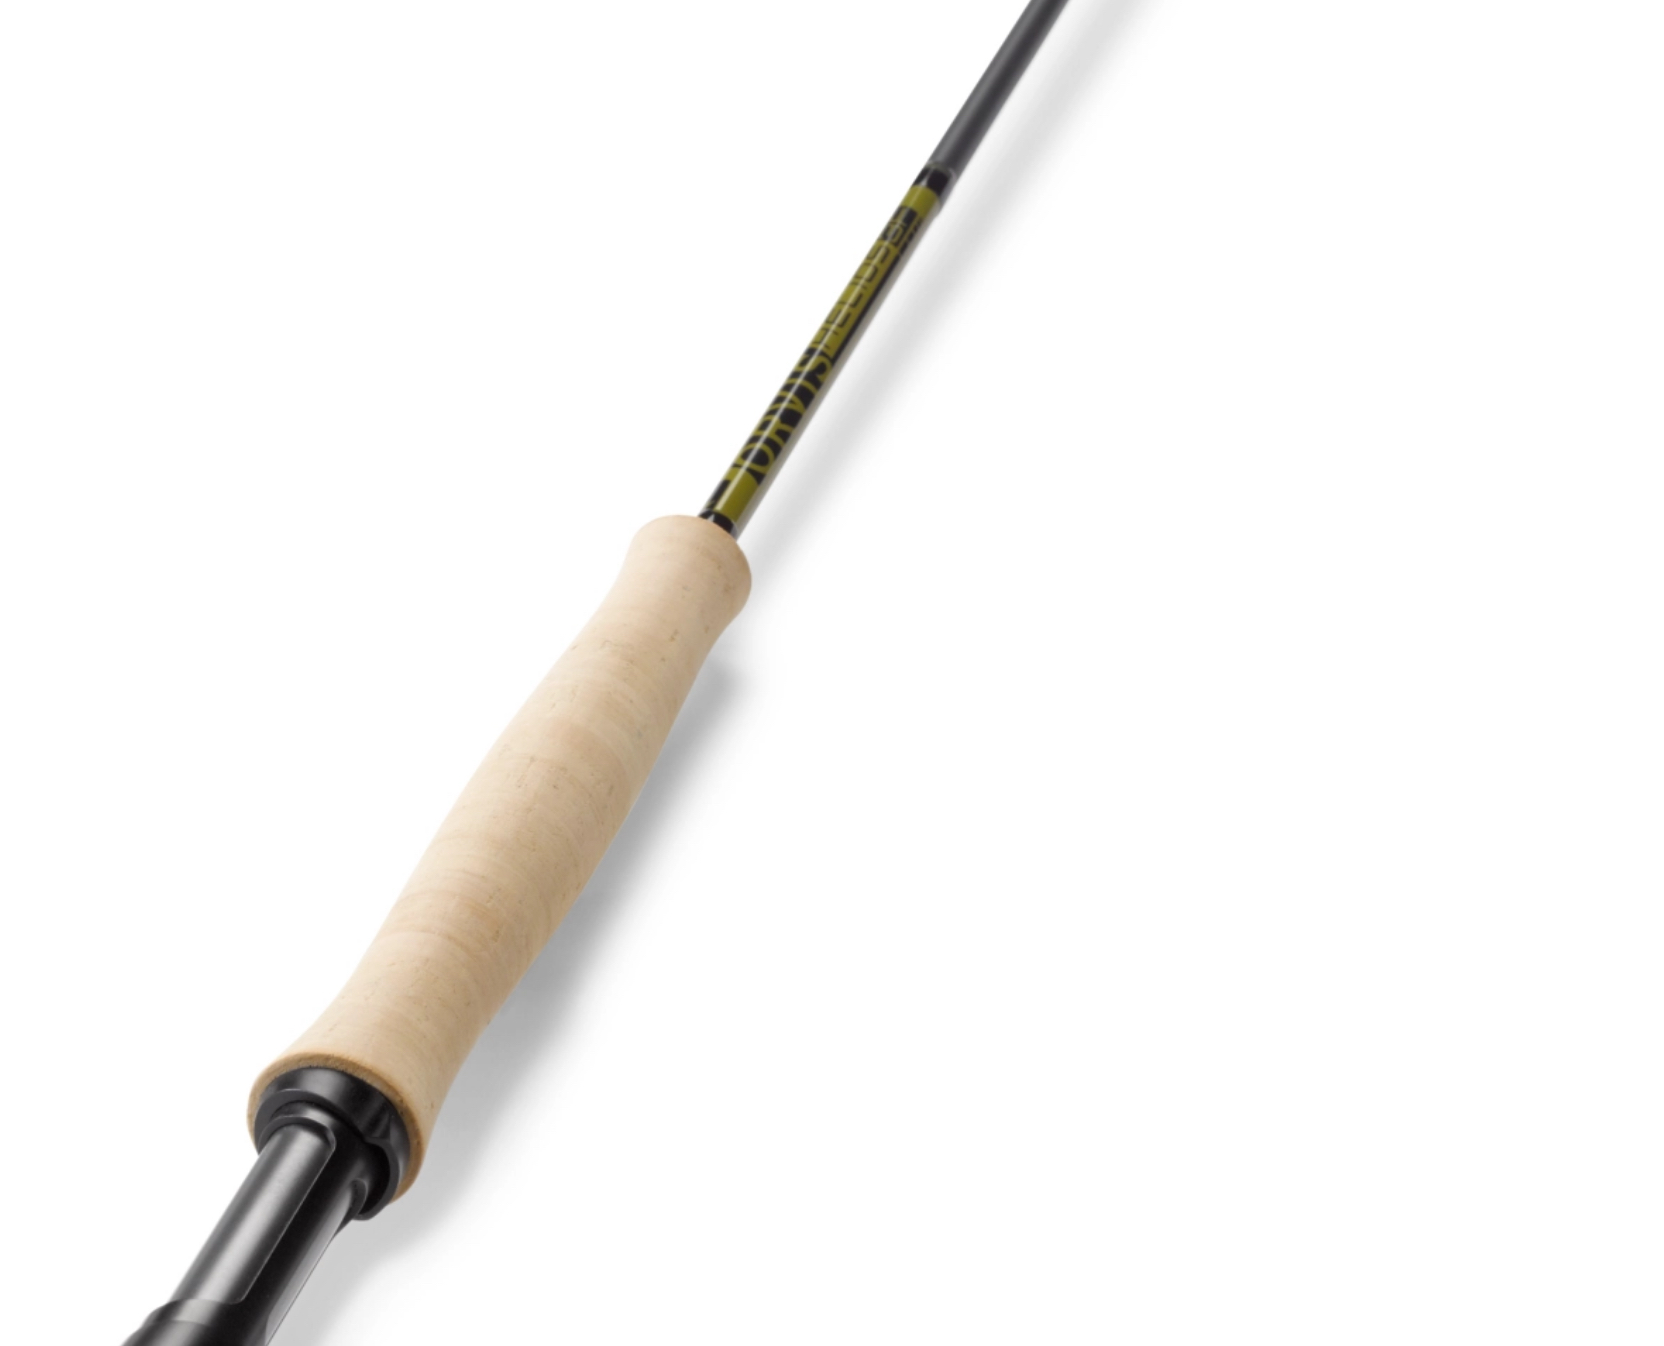 Orvis Helios 3F 9' 5-weight Fly Rod